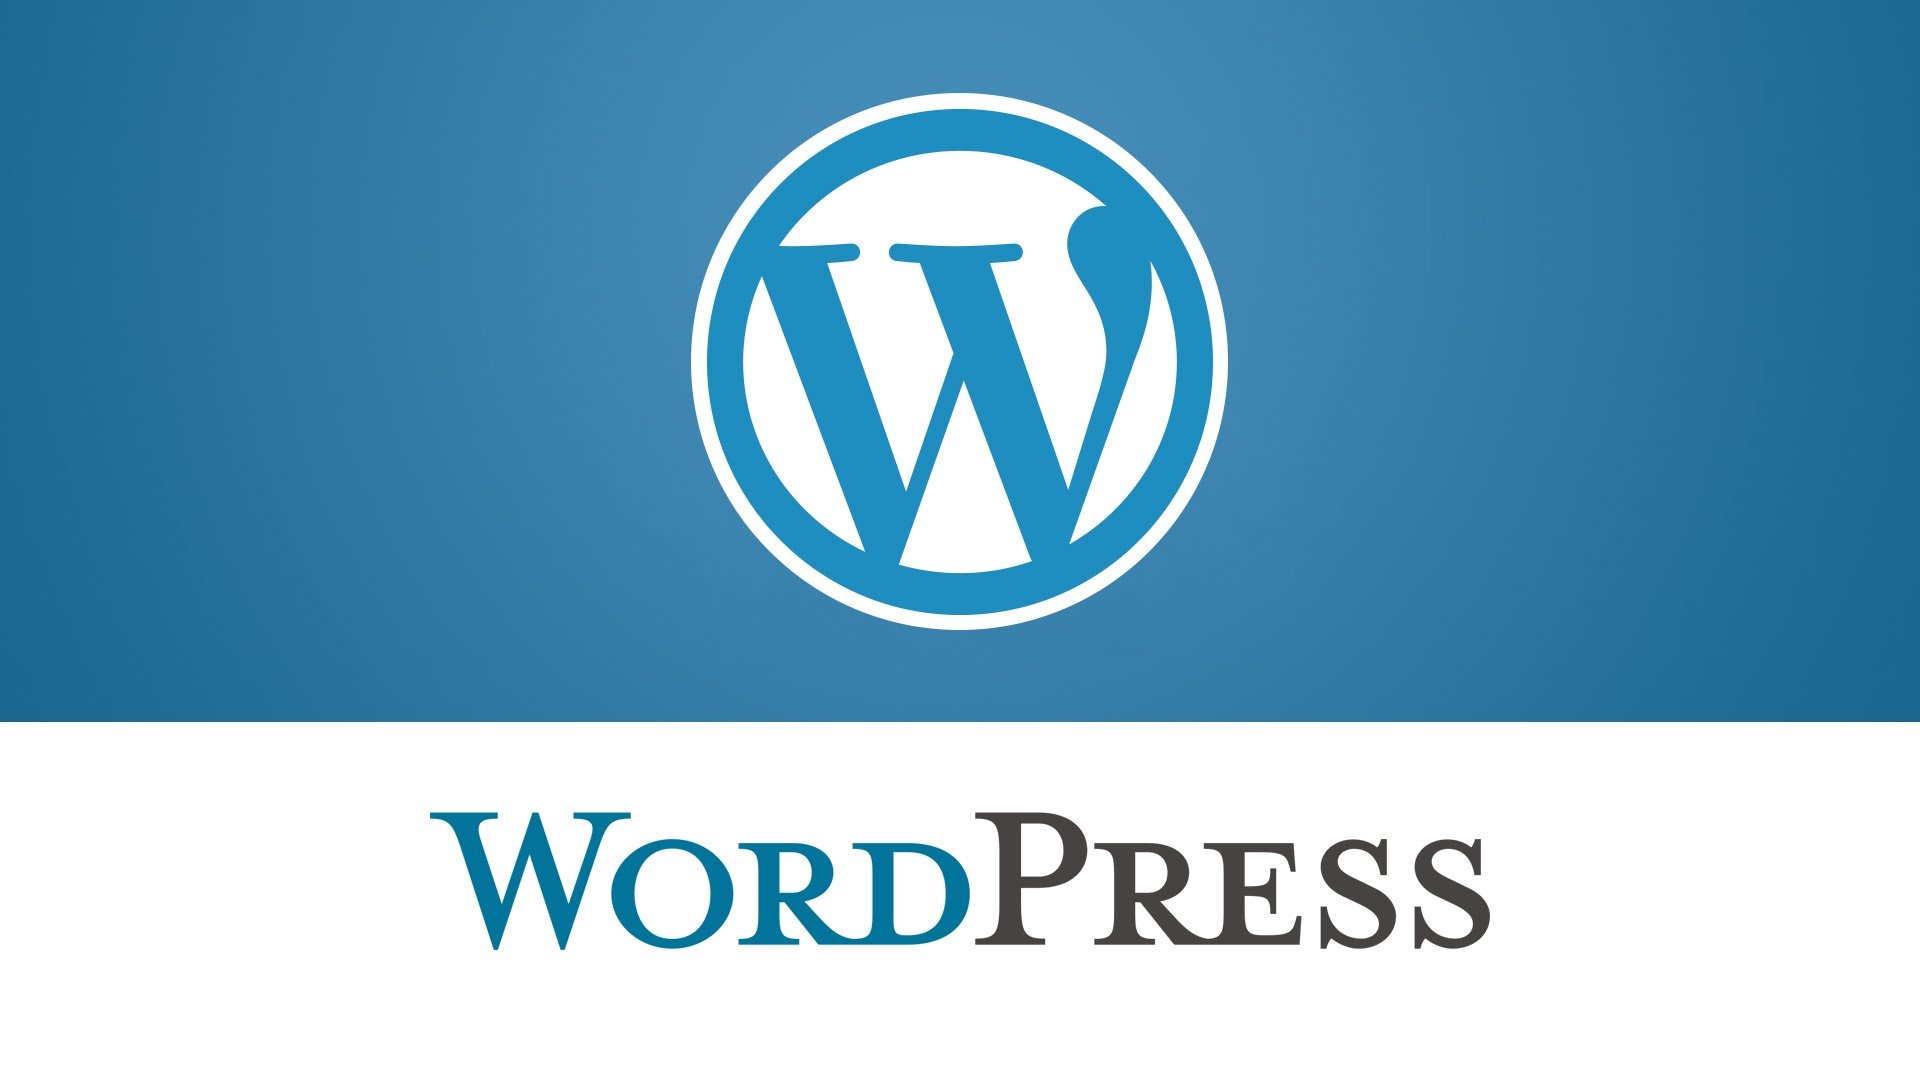 Why WordPress is the best CMS